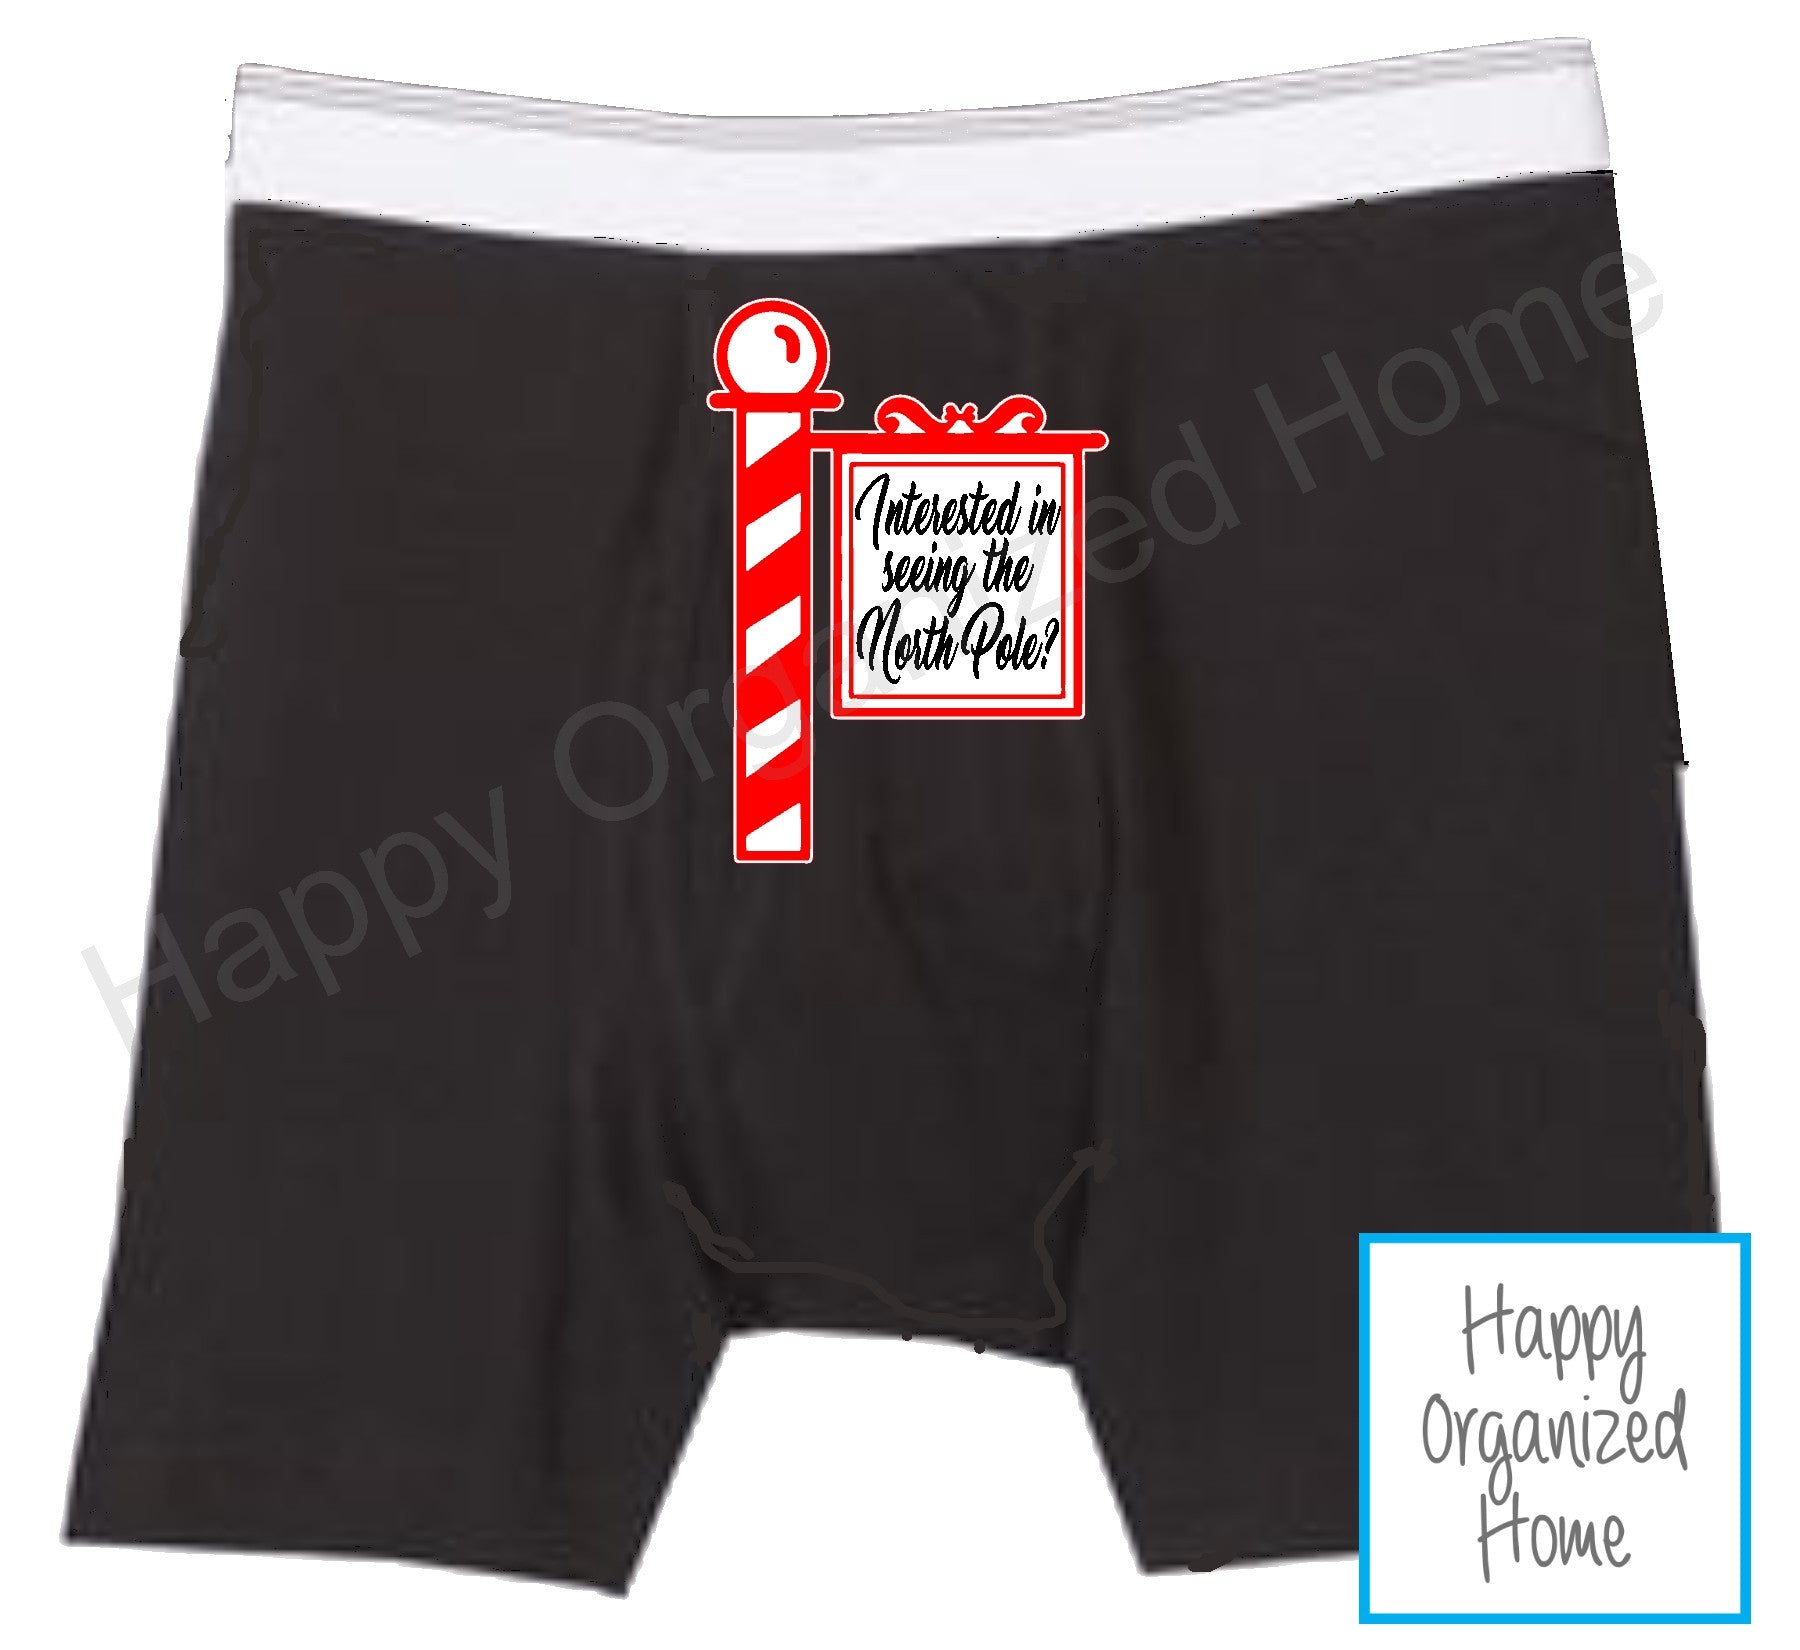 Wanna see the north Pole? -  Men's Naughty Boxer Briefs